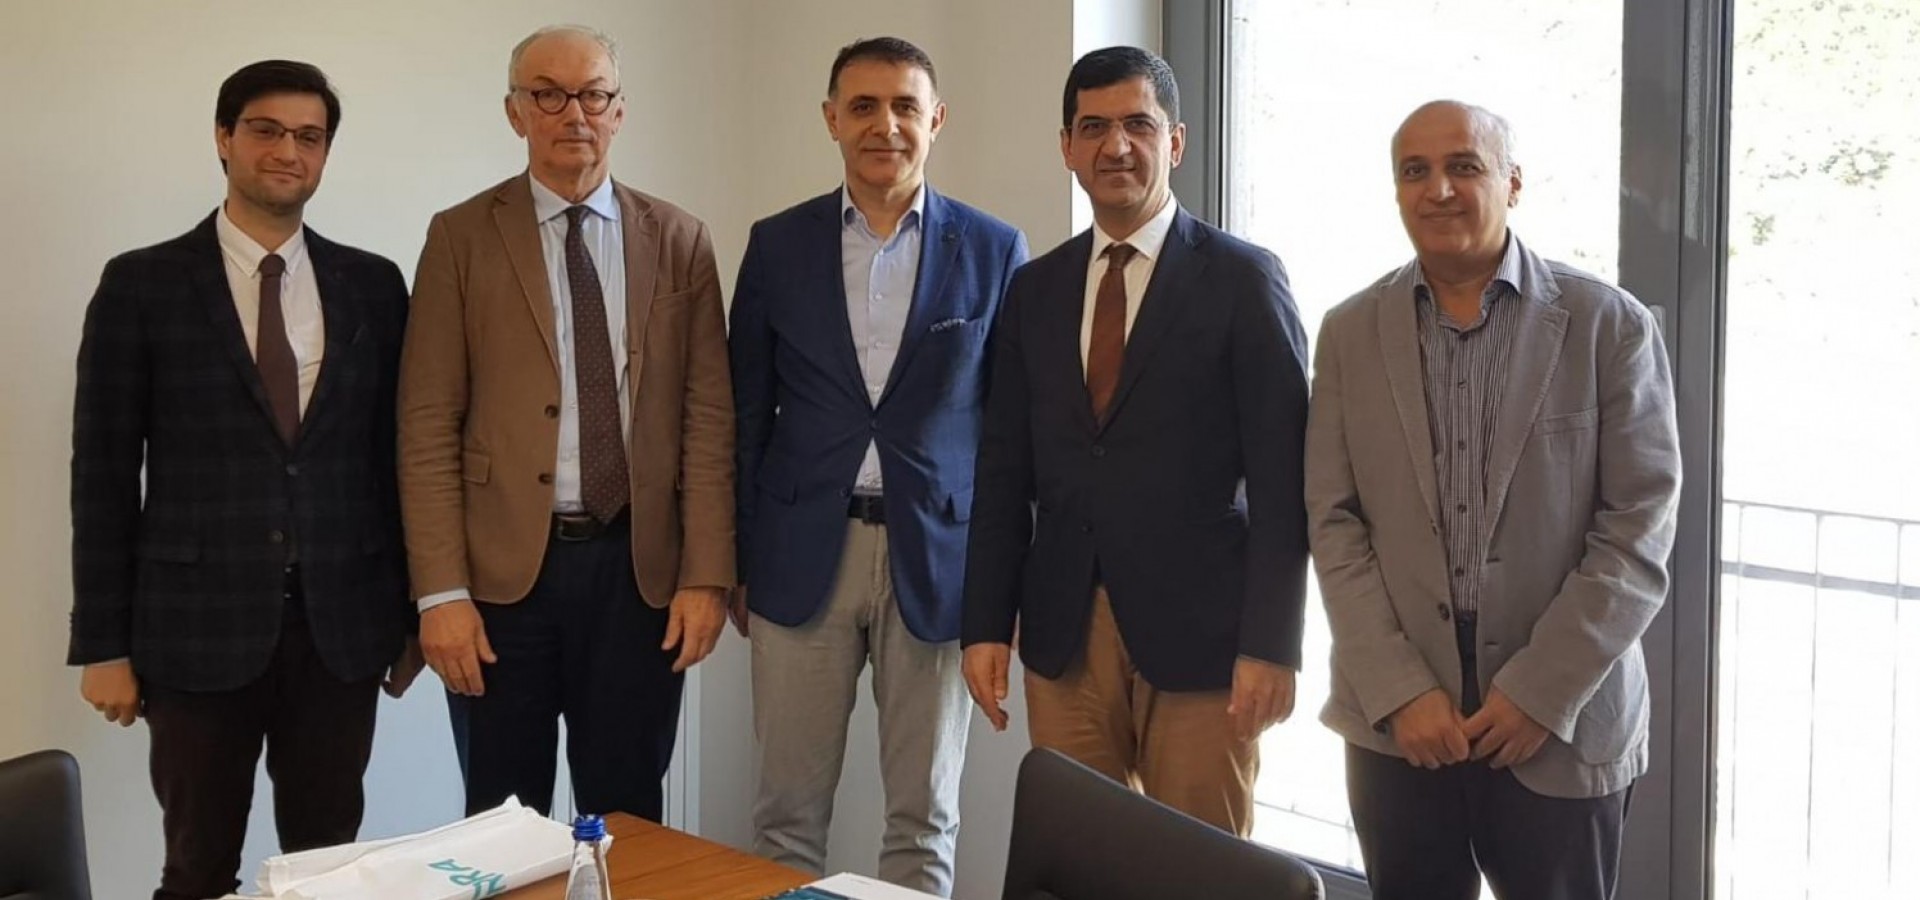 News As a result of Interra R&D cooperation with Turkish-German university